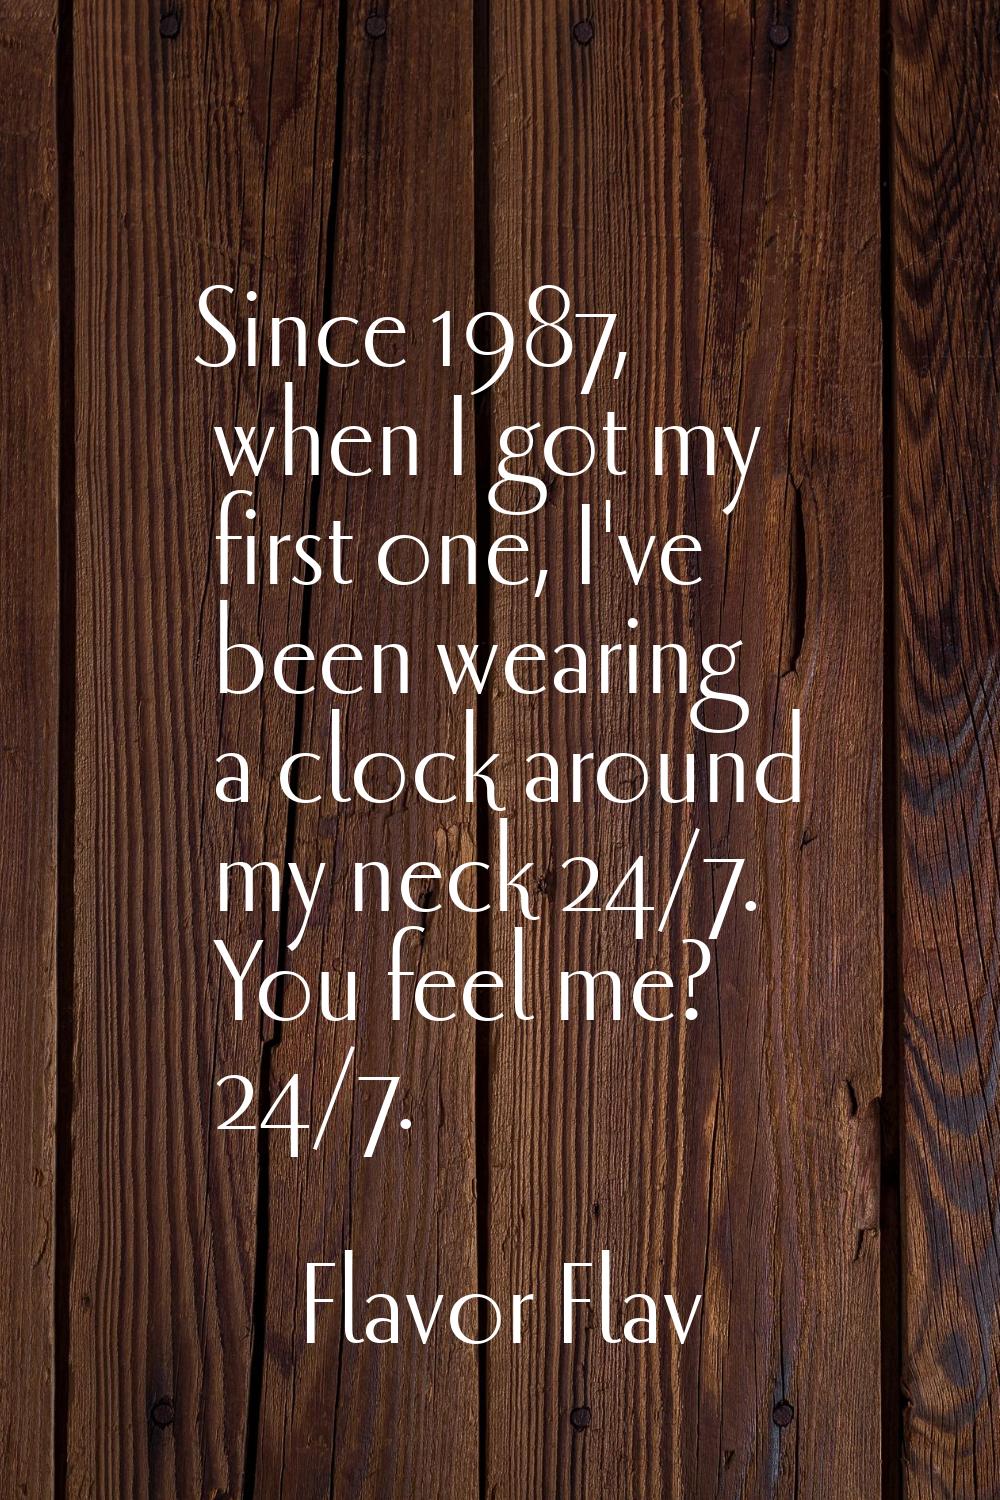 Since 1987, when I got my first one, I've been wearing a clock around my neck 24/7. You feel me? 24